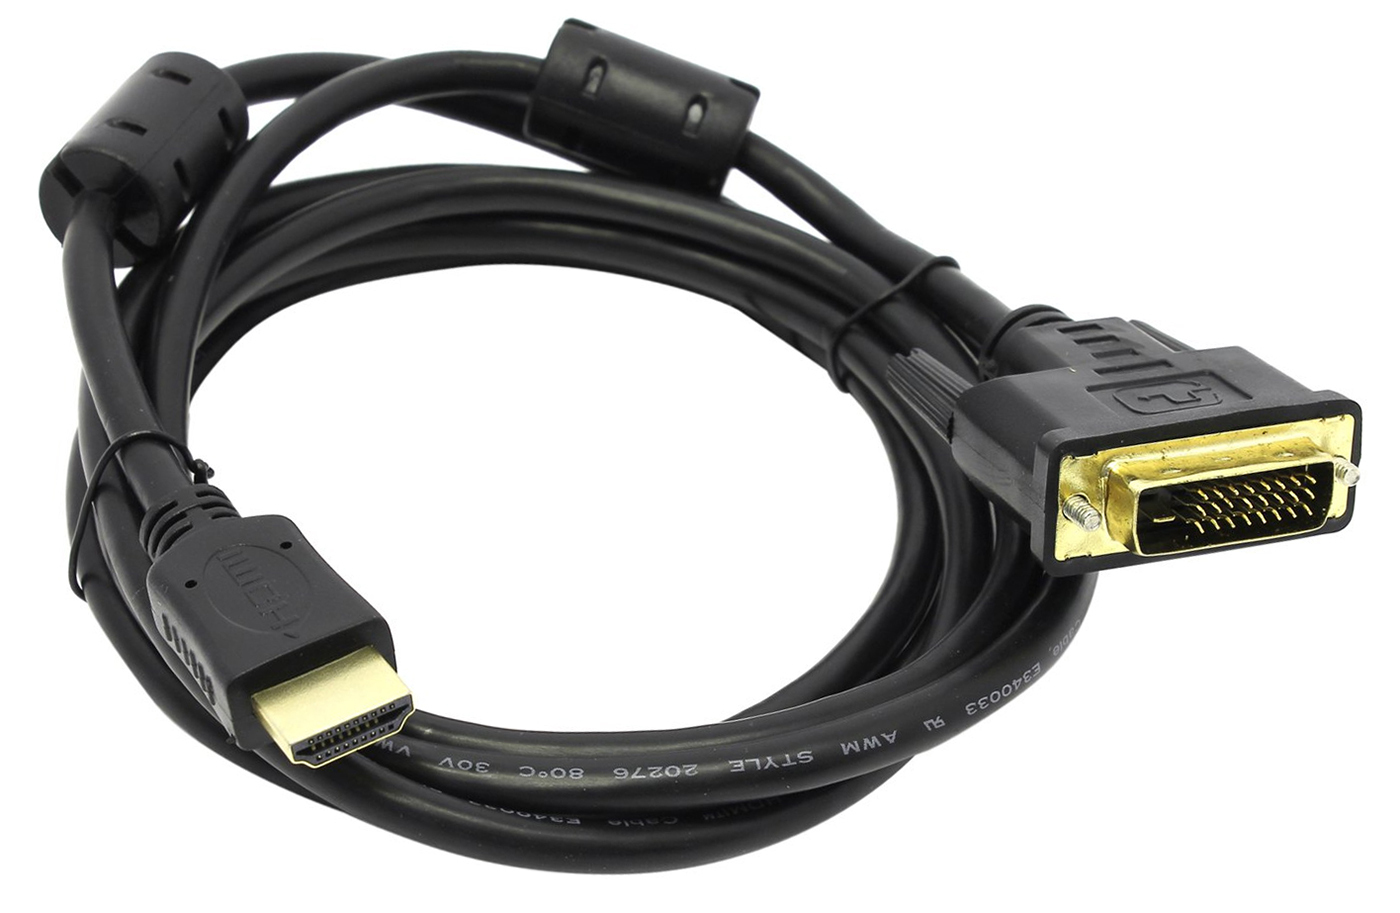 Experience immersive adult content with 3m HDMI kabel